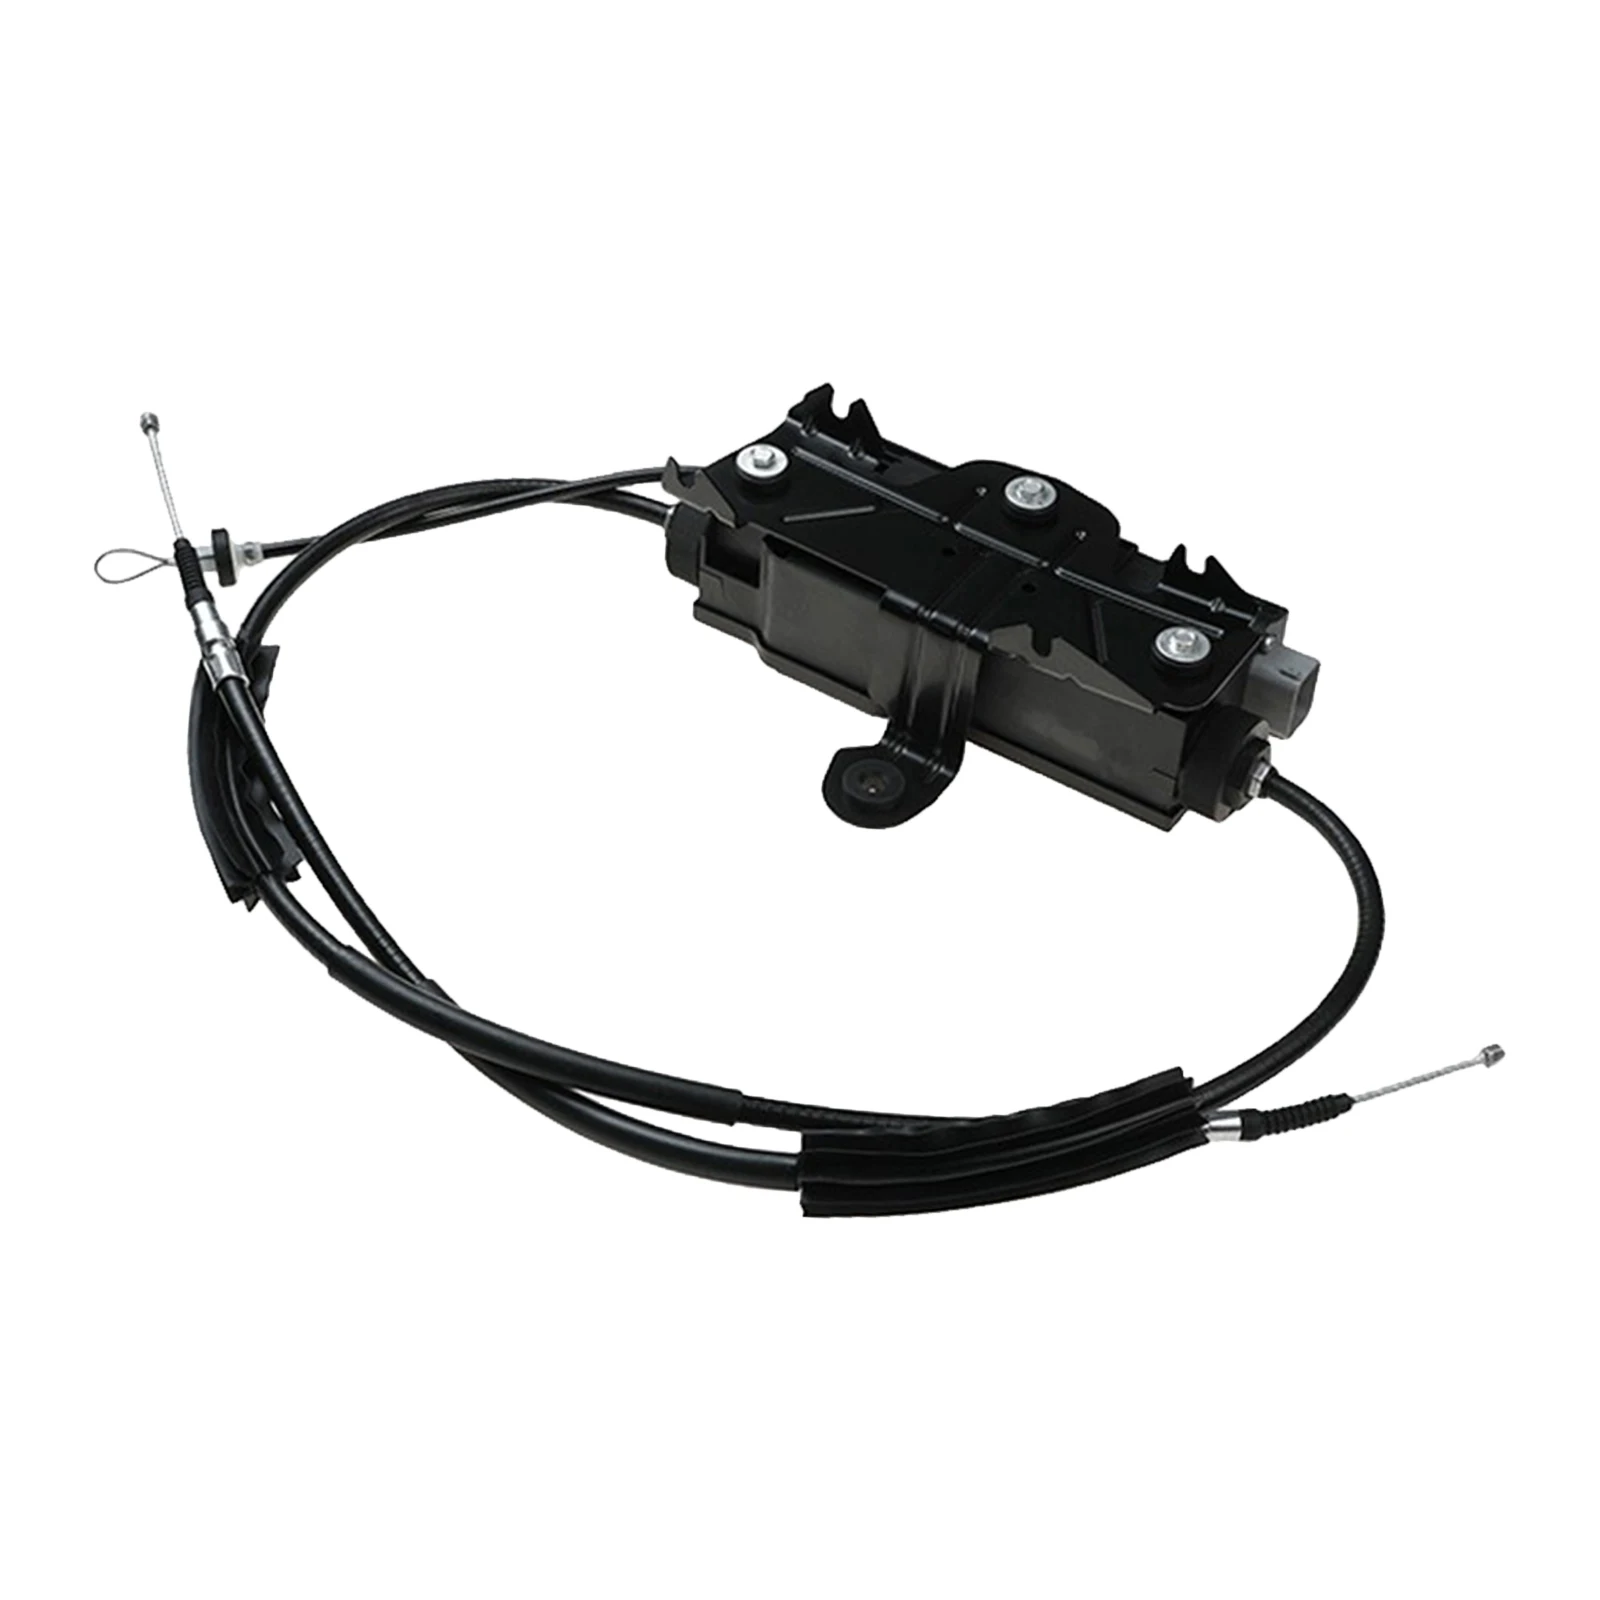 Park Brake Module Hand Brake Actuator Parking Brake Actuator With Control Unit for BMW 7 Series F01 F02 Easy to Install